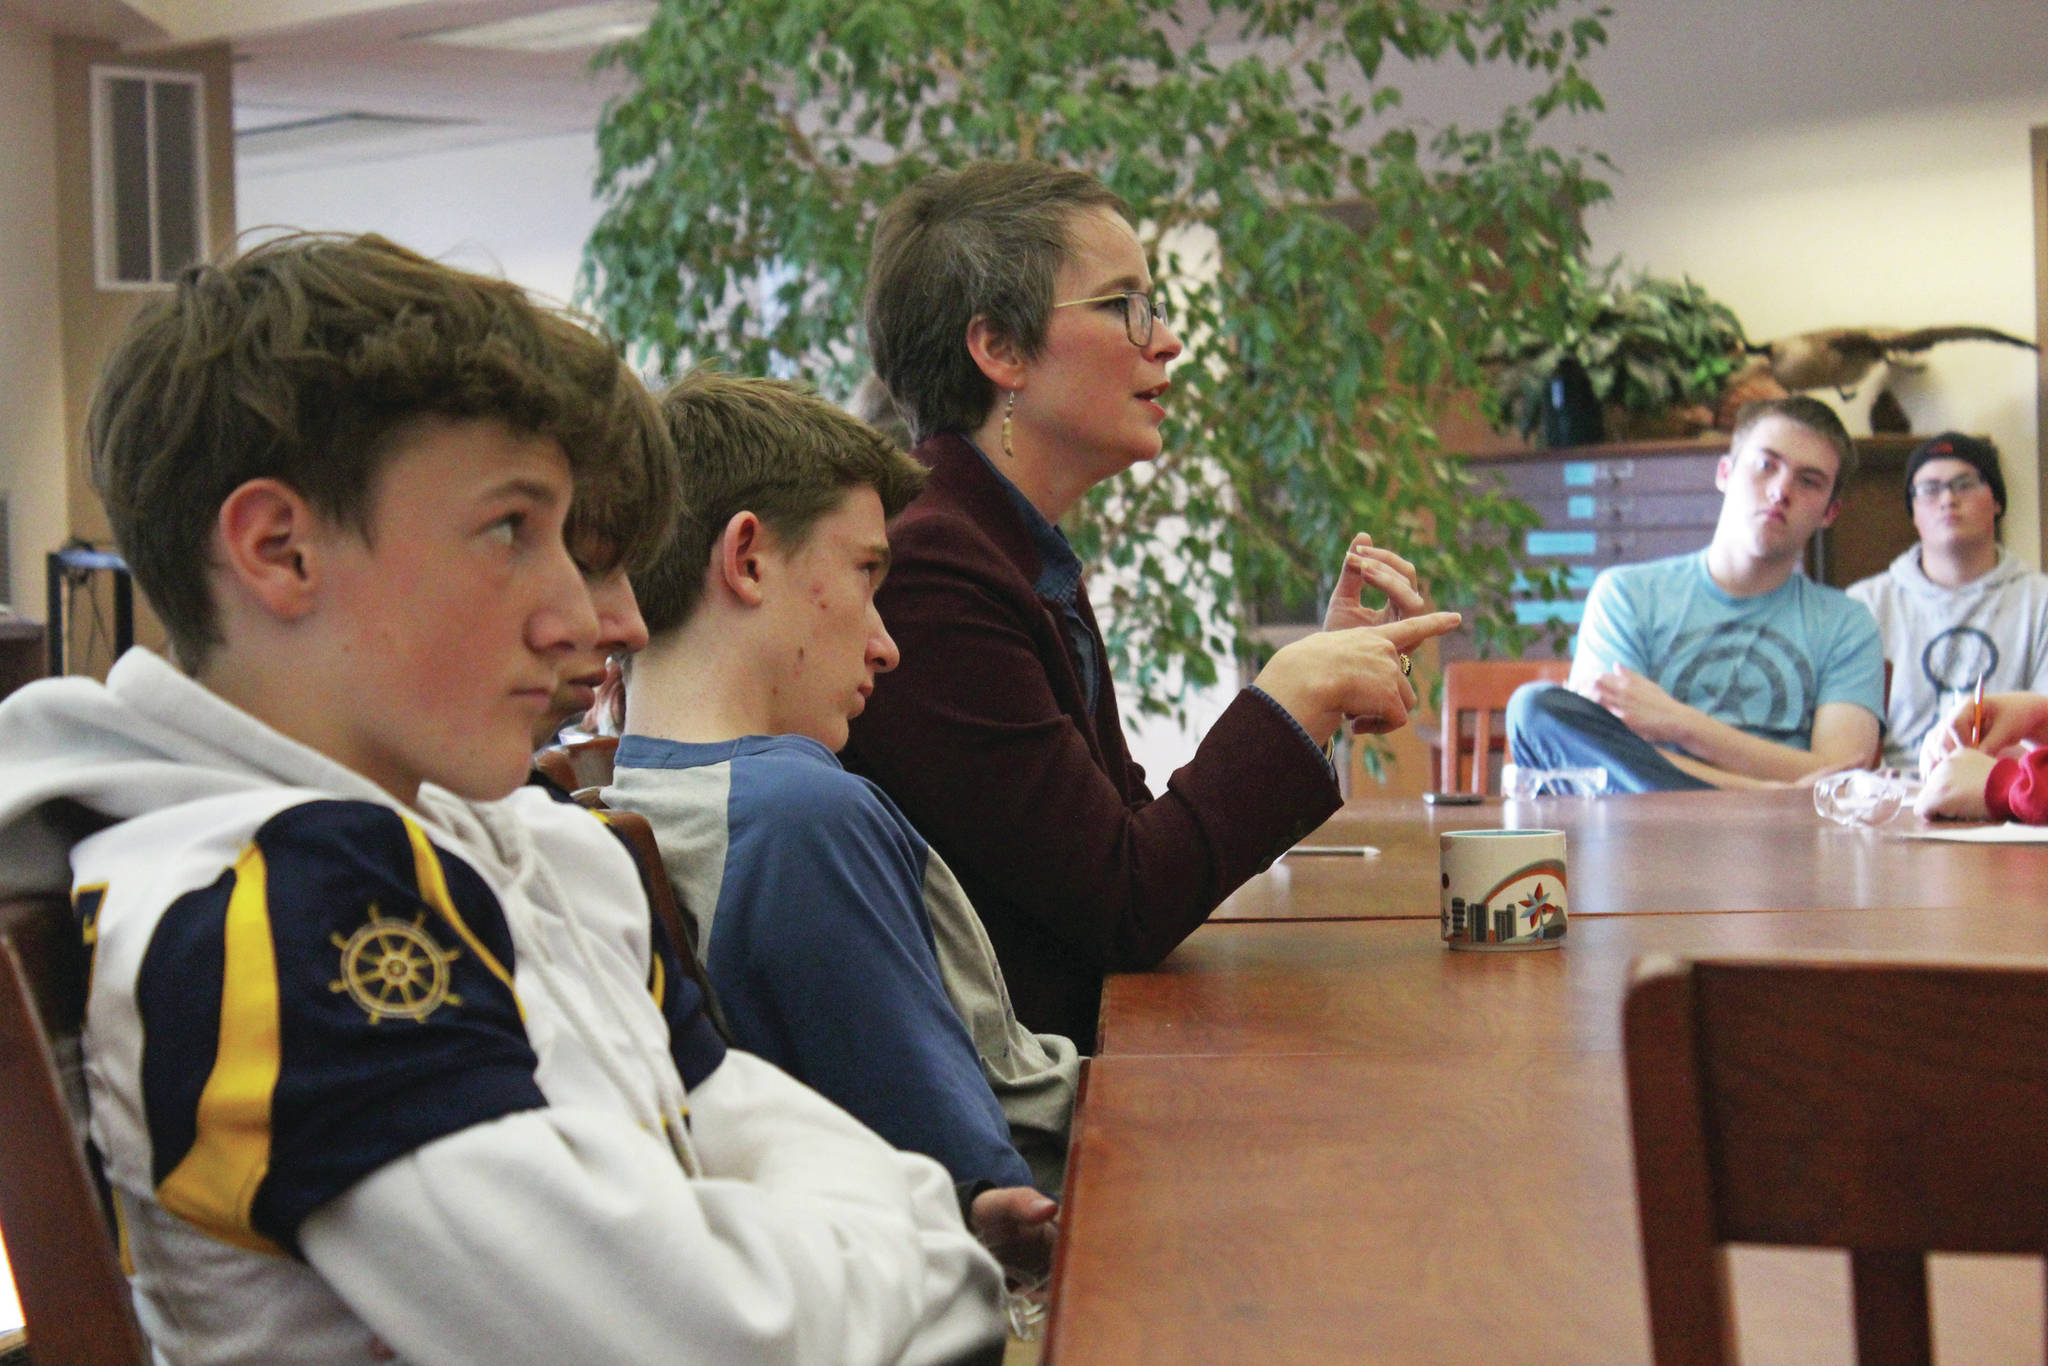 Rep. Sarah Vance (R-Homer) speaks with Homer High School students about the environment and other state issues during one of two listening sessions she held Friday, Sept. 20, 2019 at the school in Homer, Alaska. (Photo by Megan Pacer/Homer News)